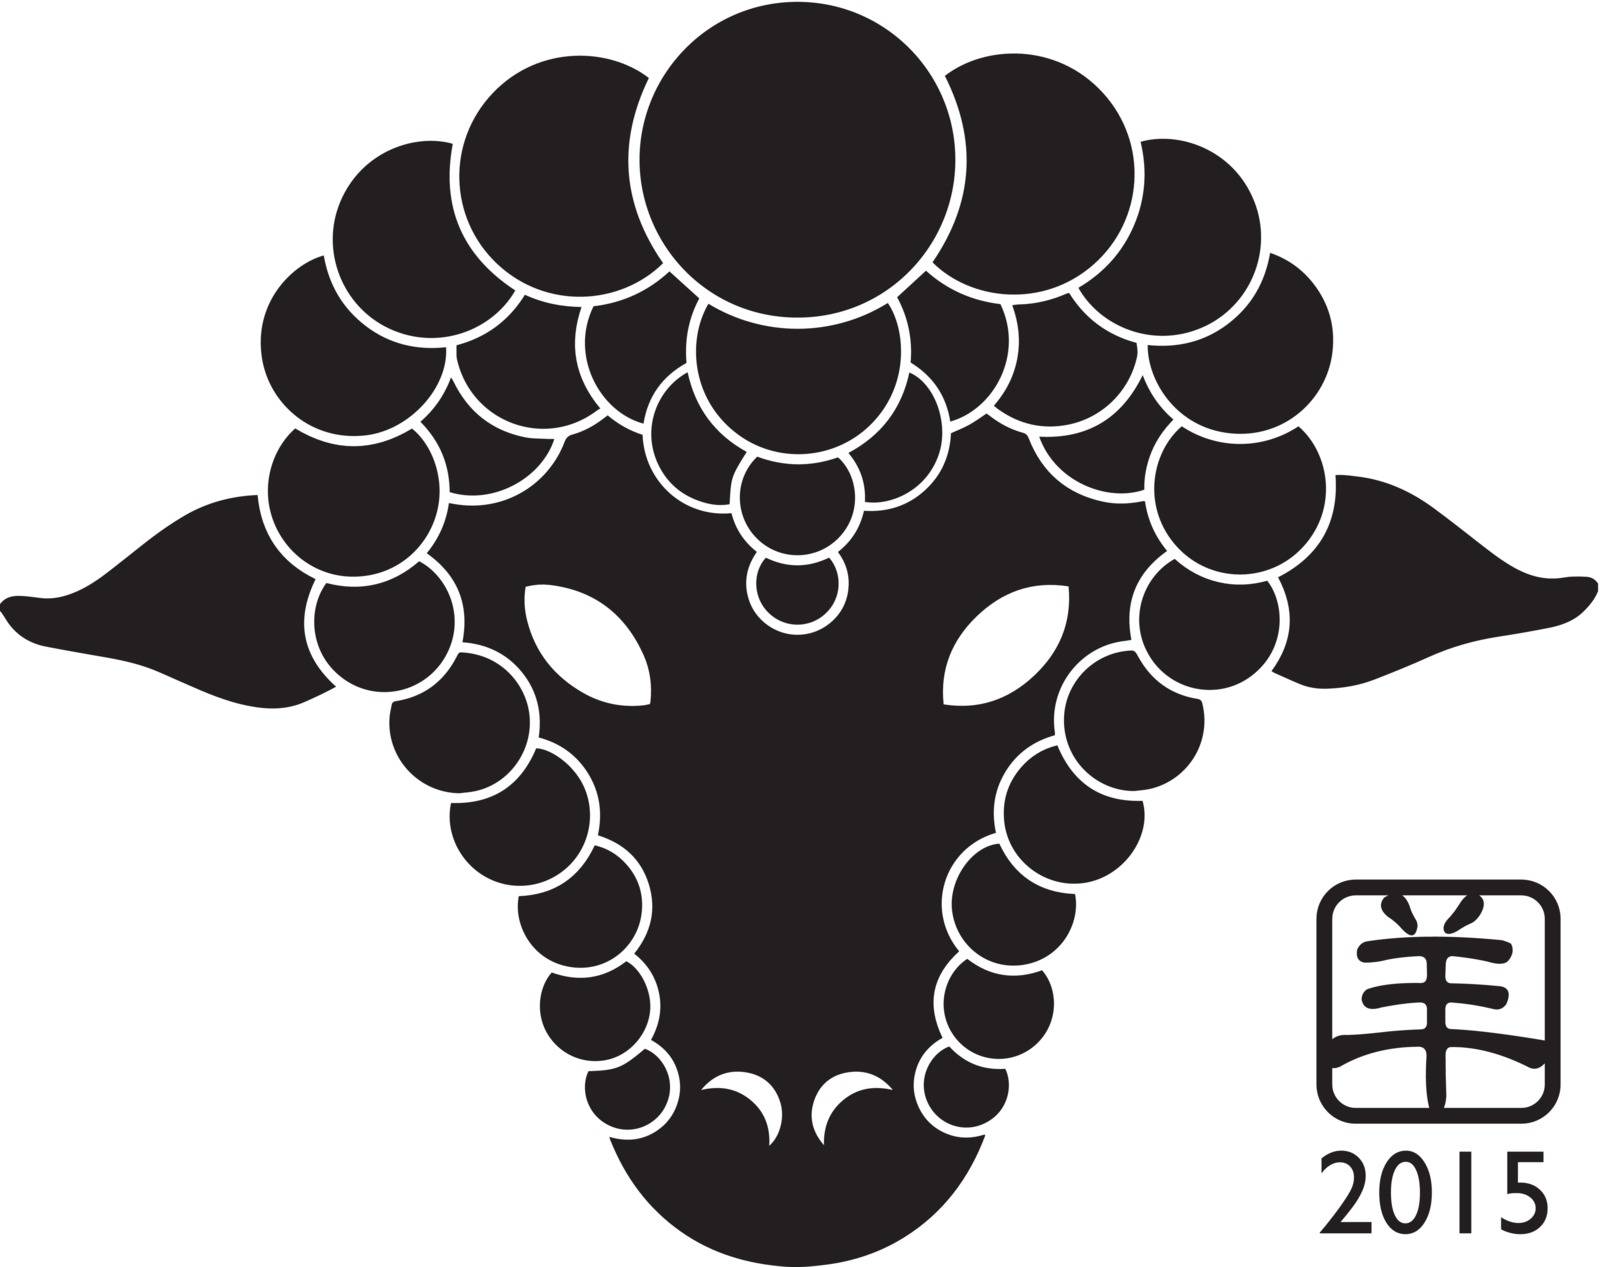 2015 Chinese New Year of the Sheep Black Silhouette Isolated on White Background with Chinese Text Symbol of Goat